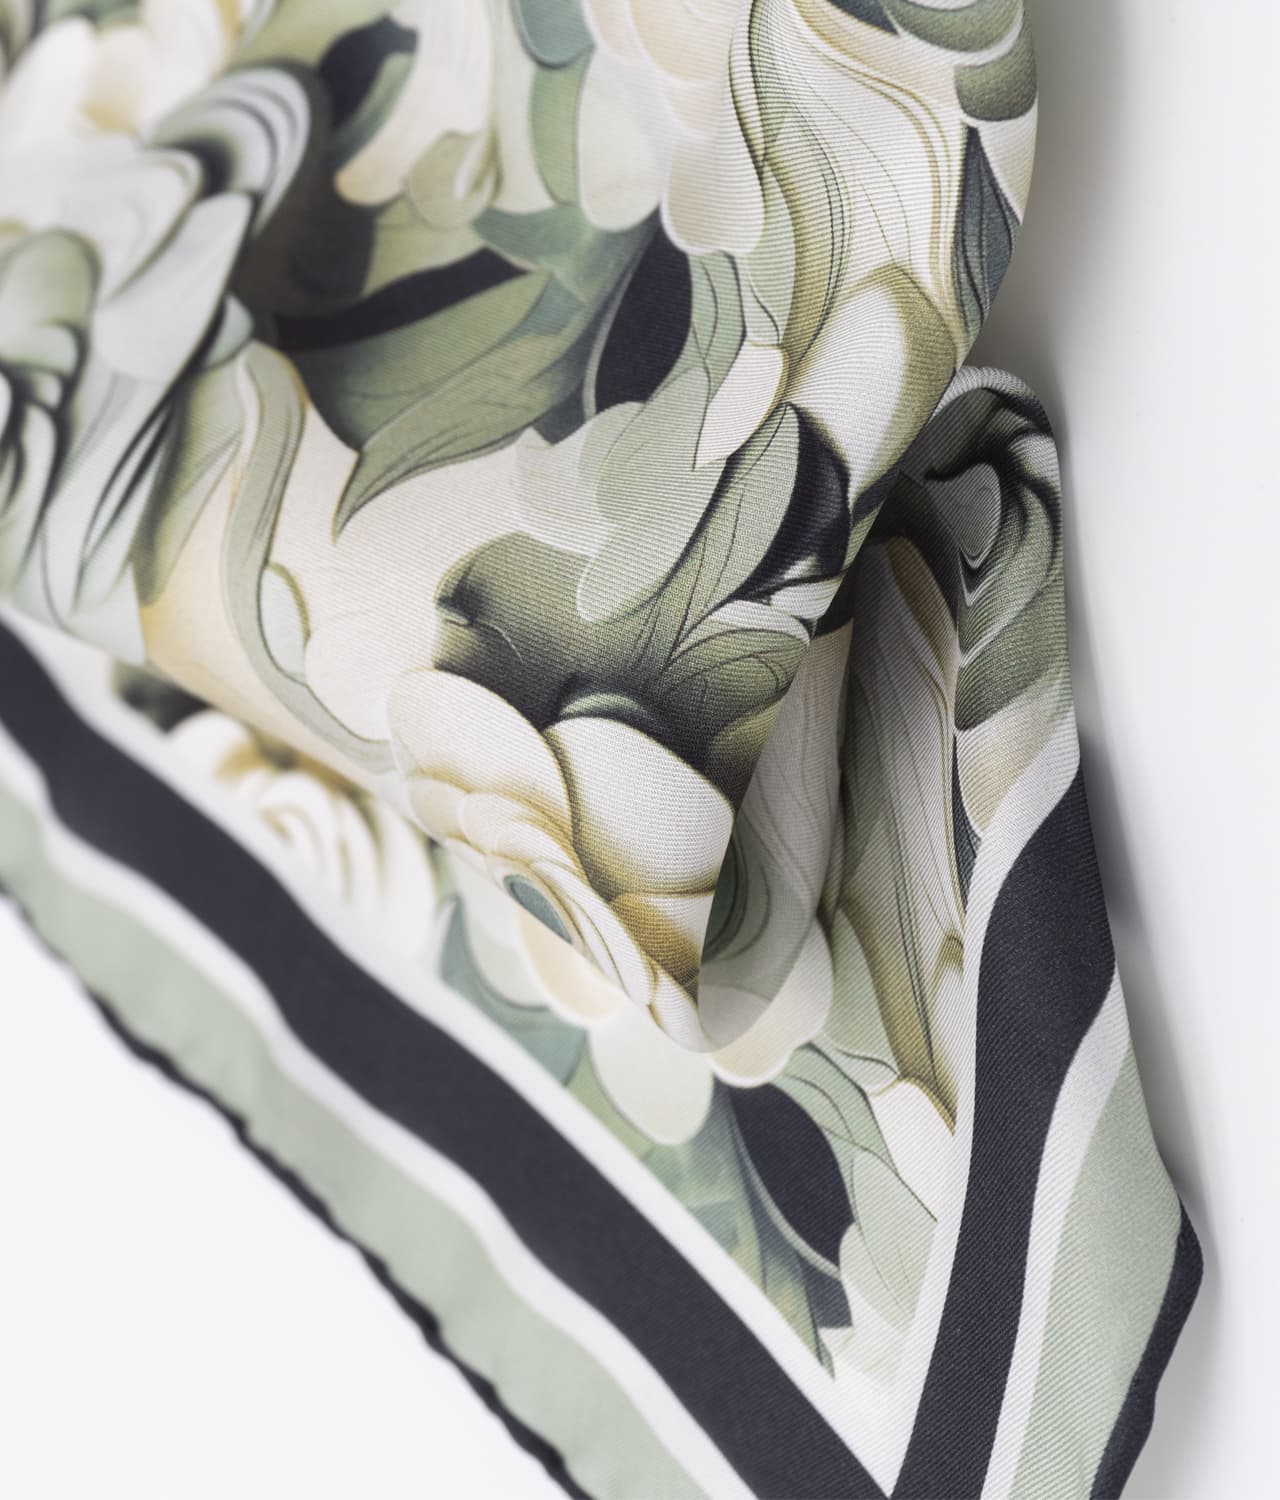 100% Silk Green/ White Pocket Square - Abstract Floral Design